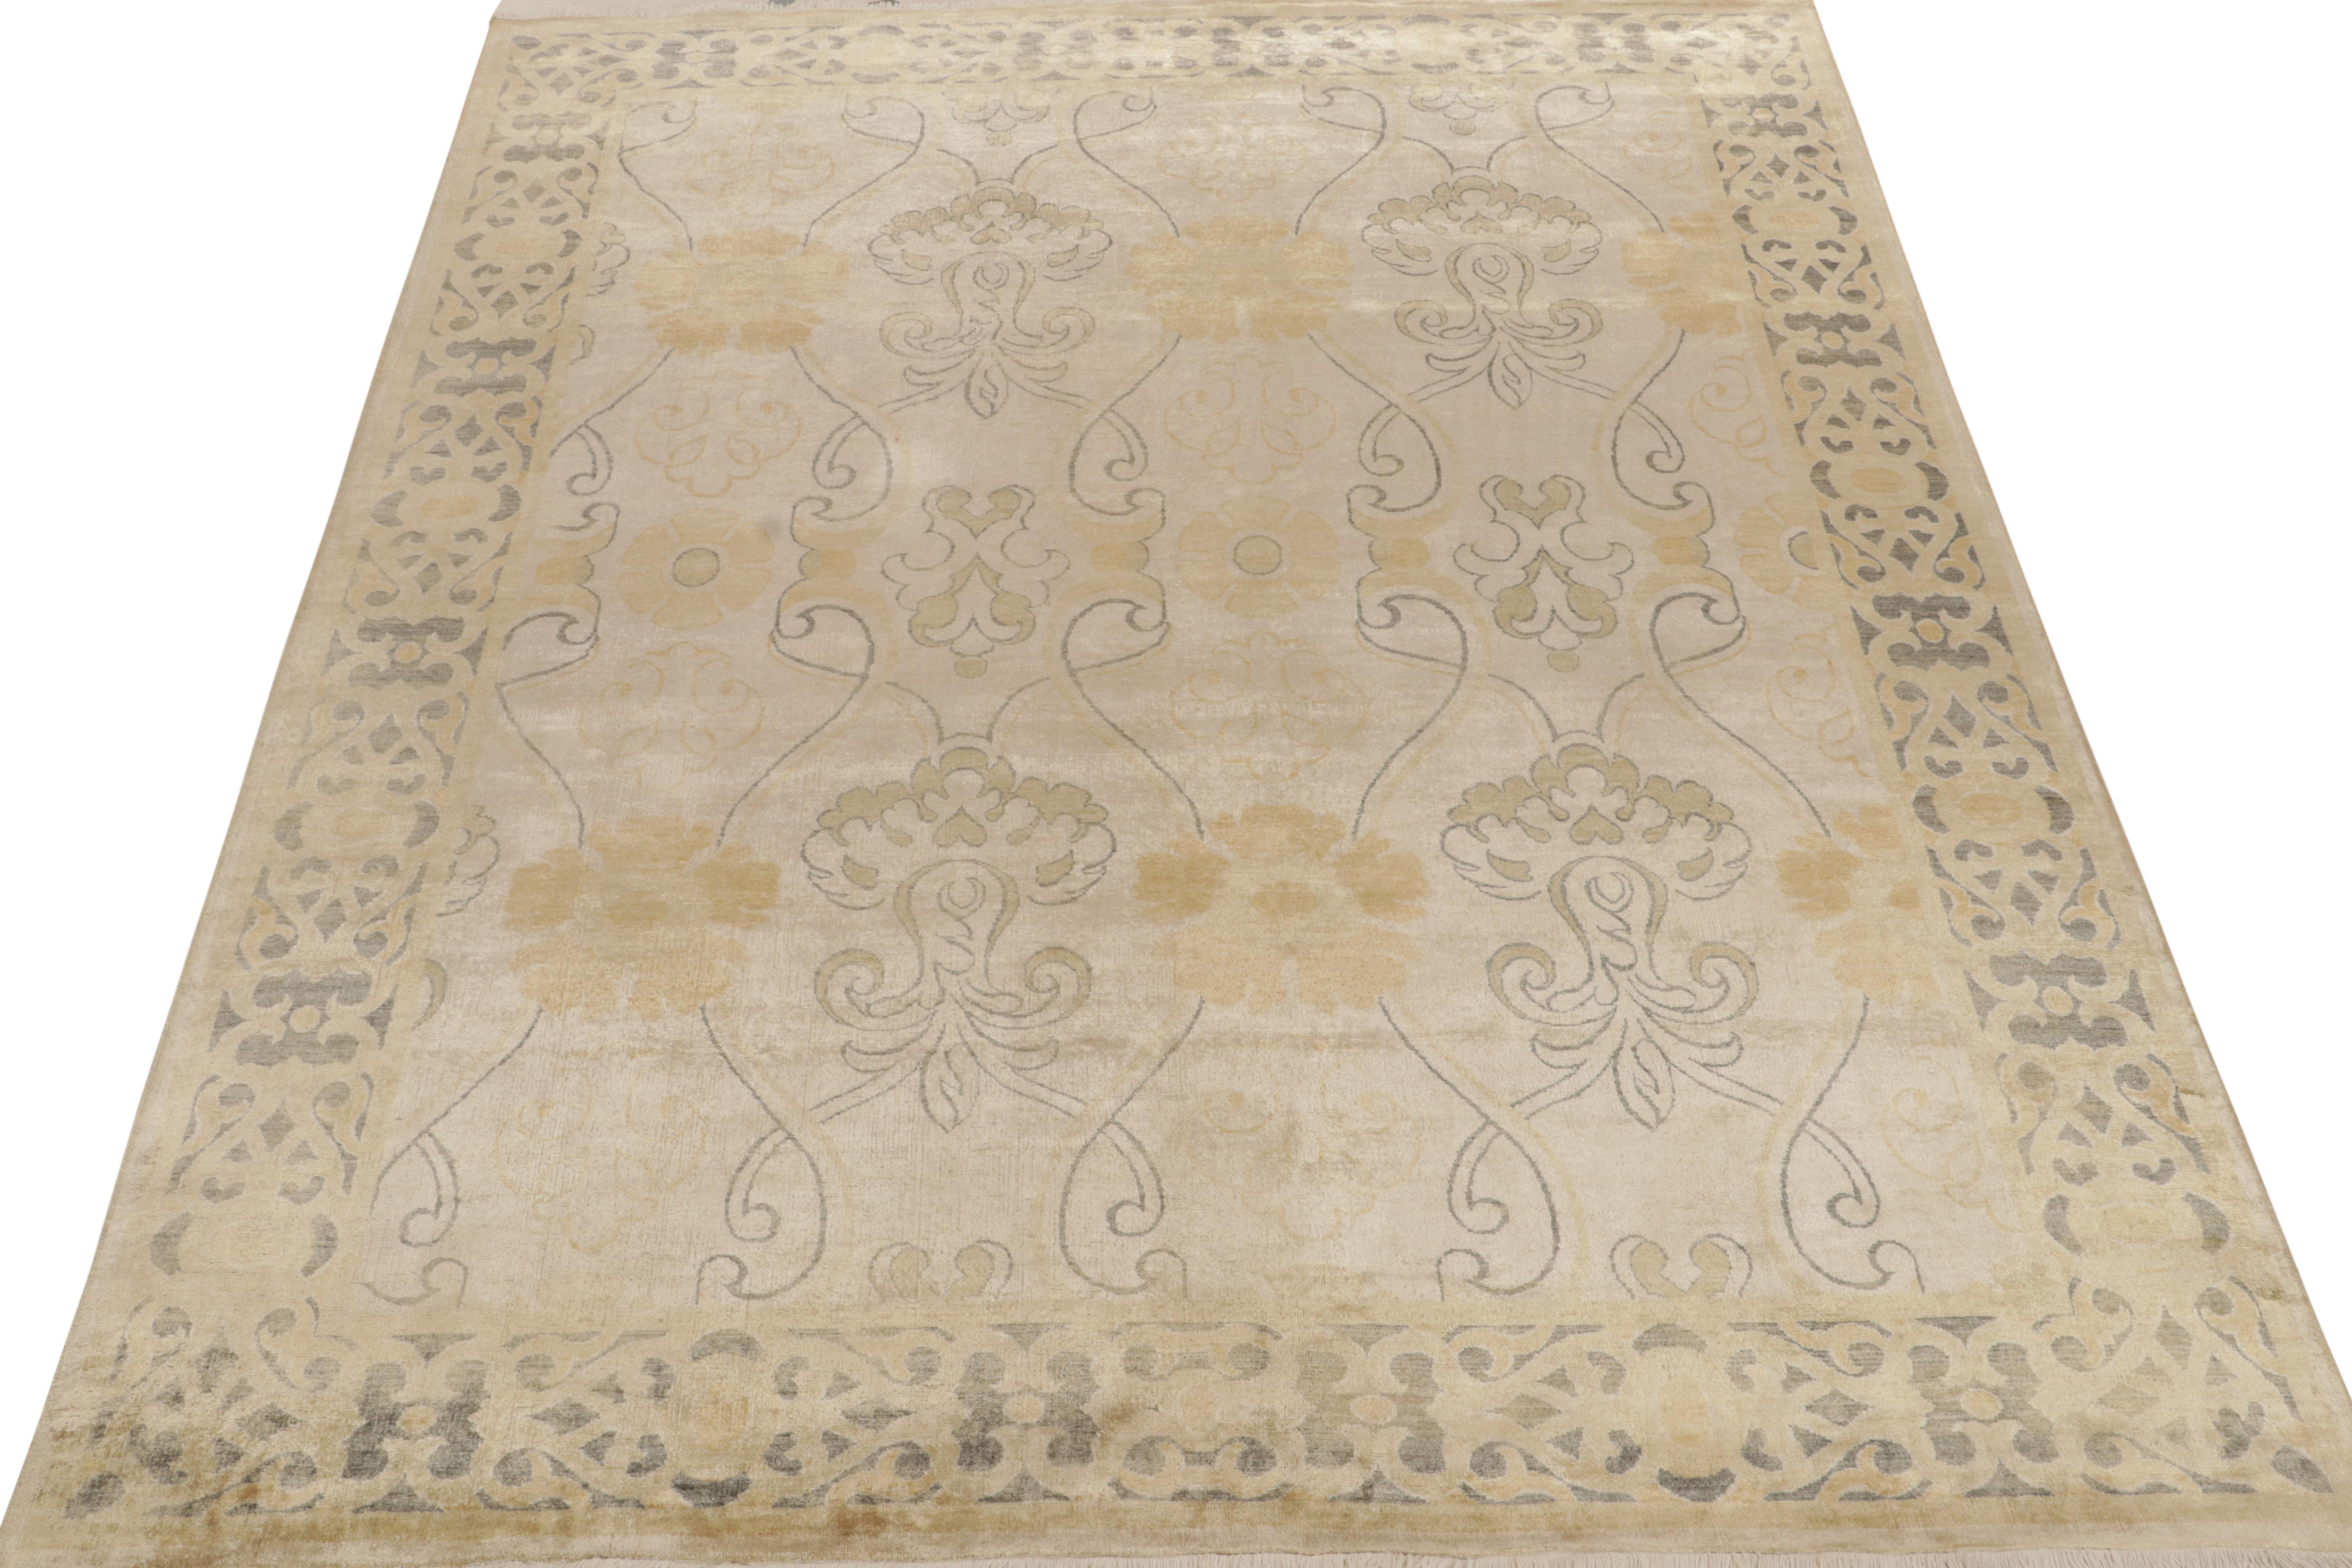 Indian Rug & Kilim’s Art Nouveau Style Rug in Beige with Gold Trellis Floral Patterns For Sale